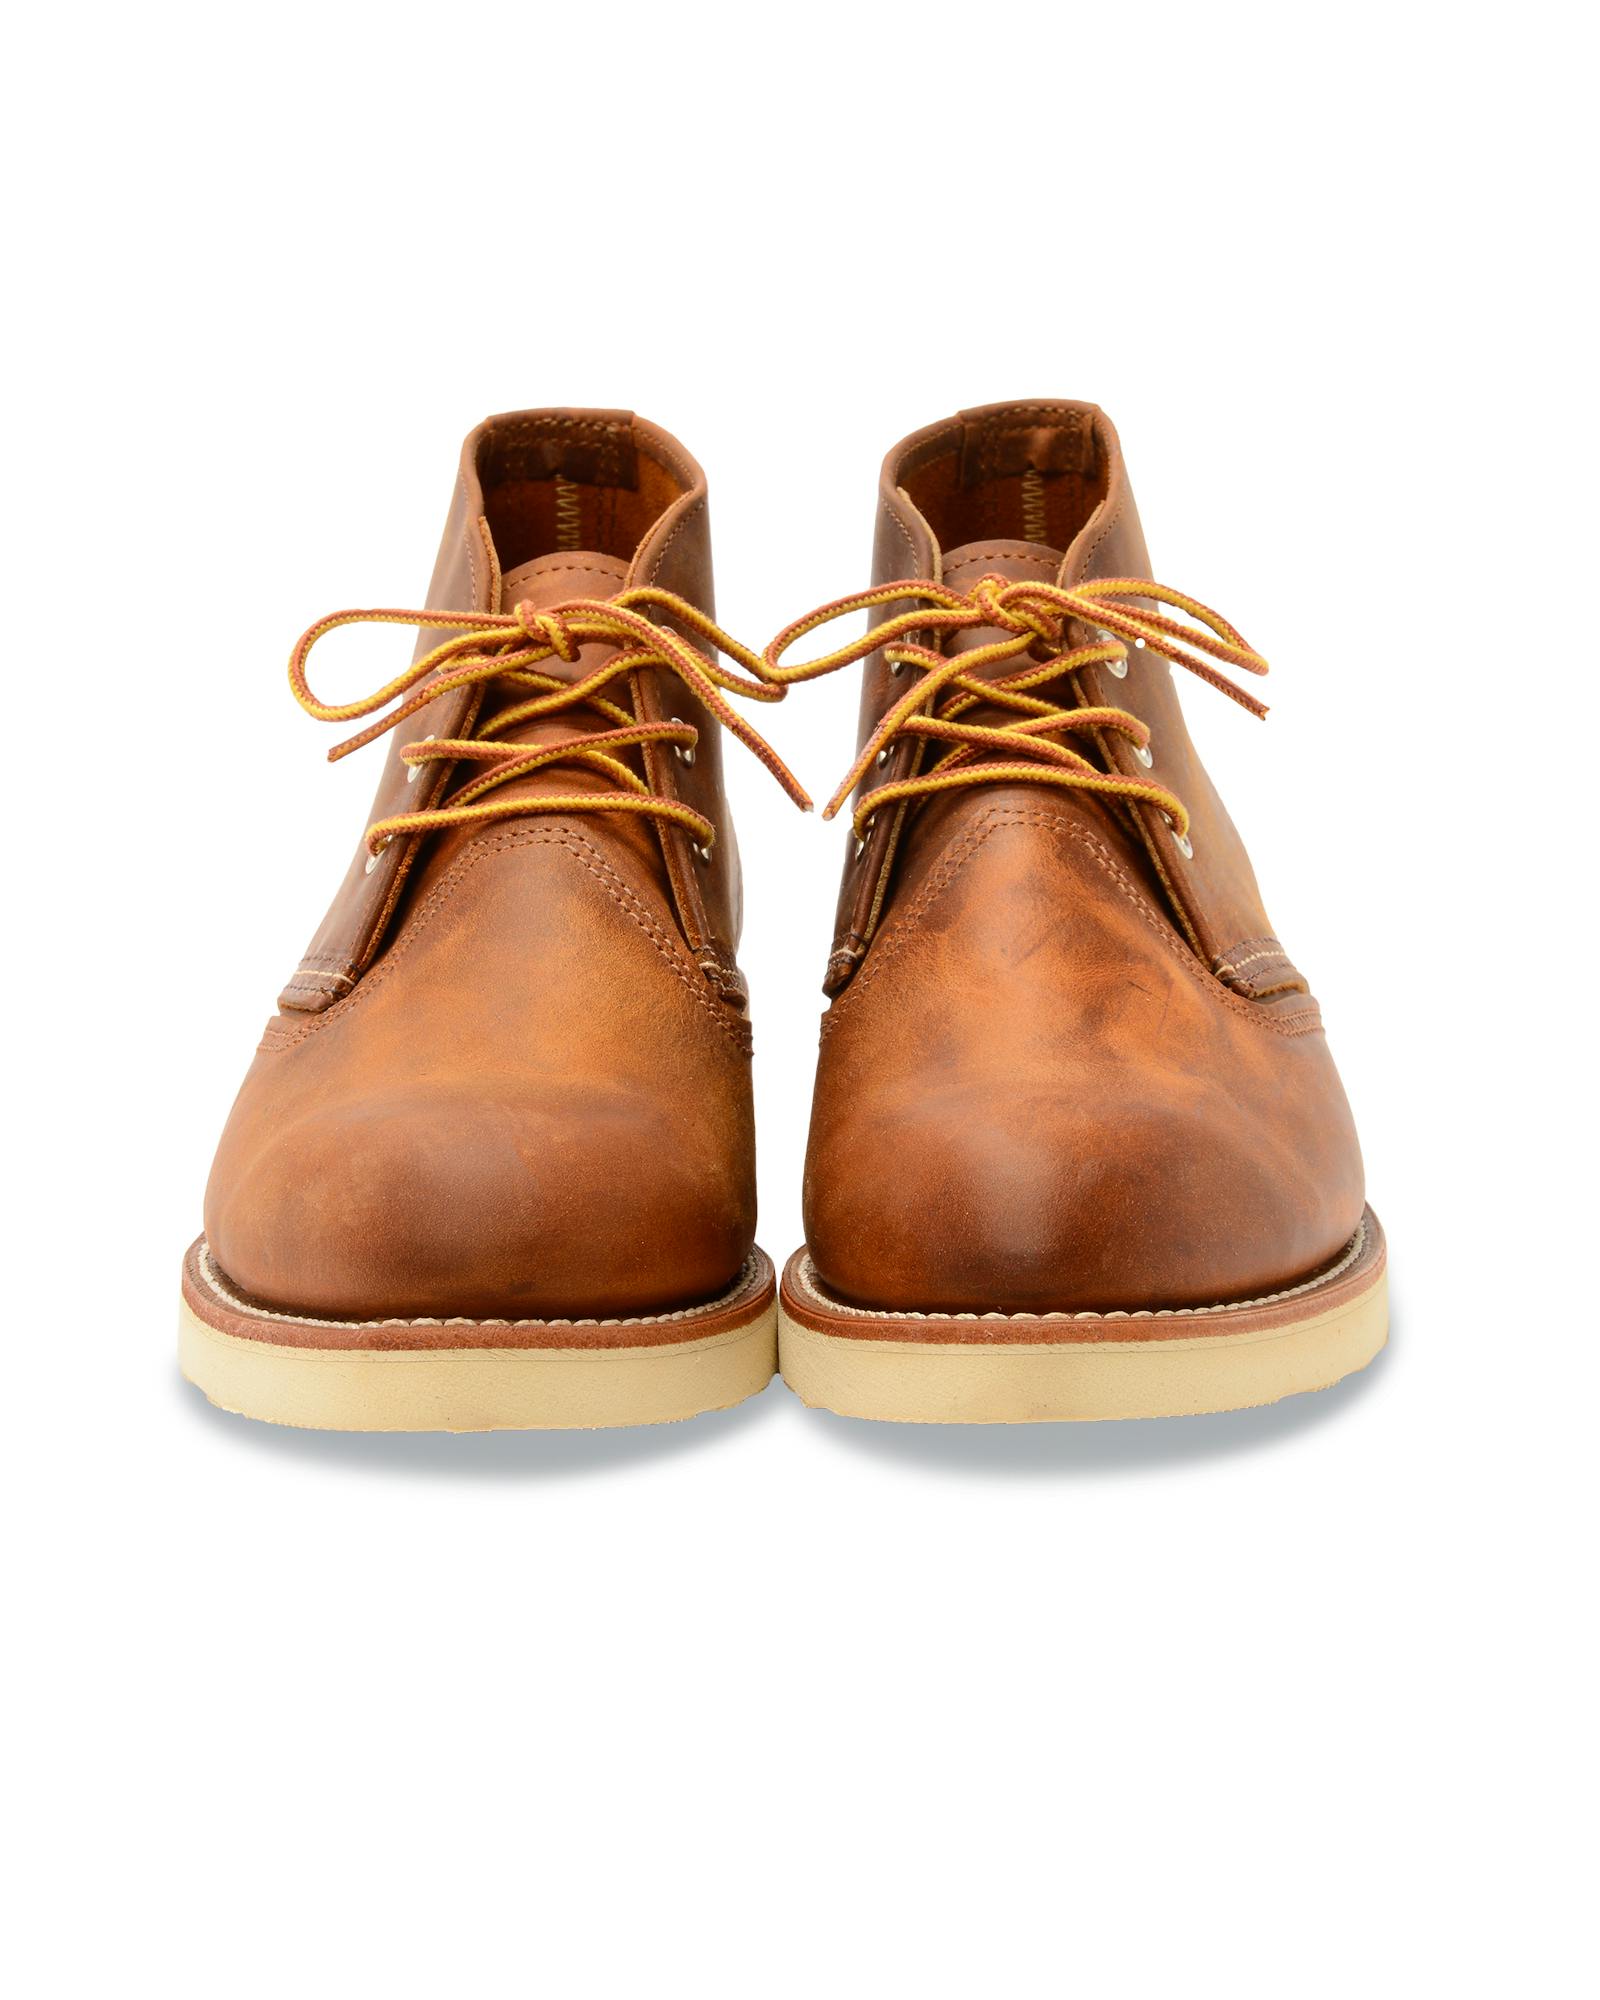 Red Wing Heritage Work Chukka Boot - Copper Rough & Tough, Chukka Boots